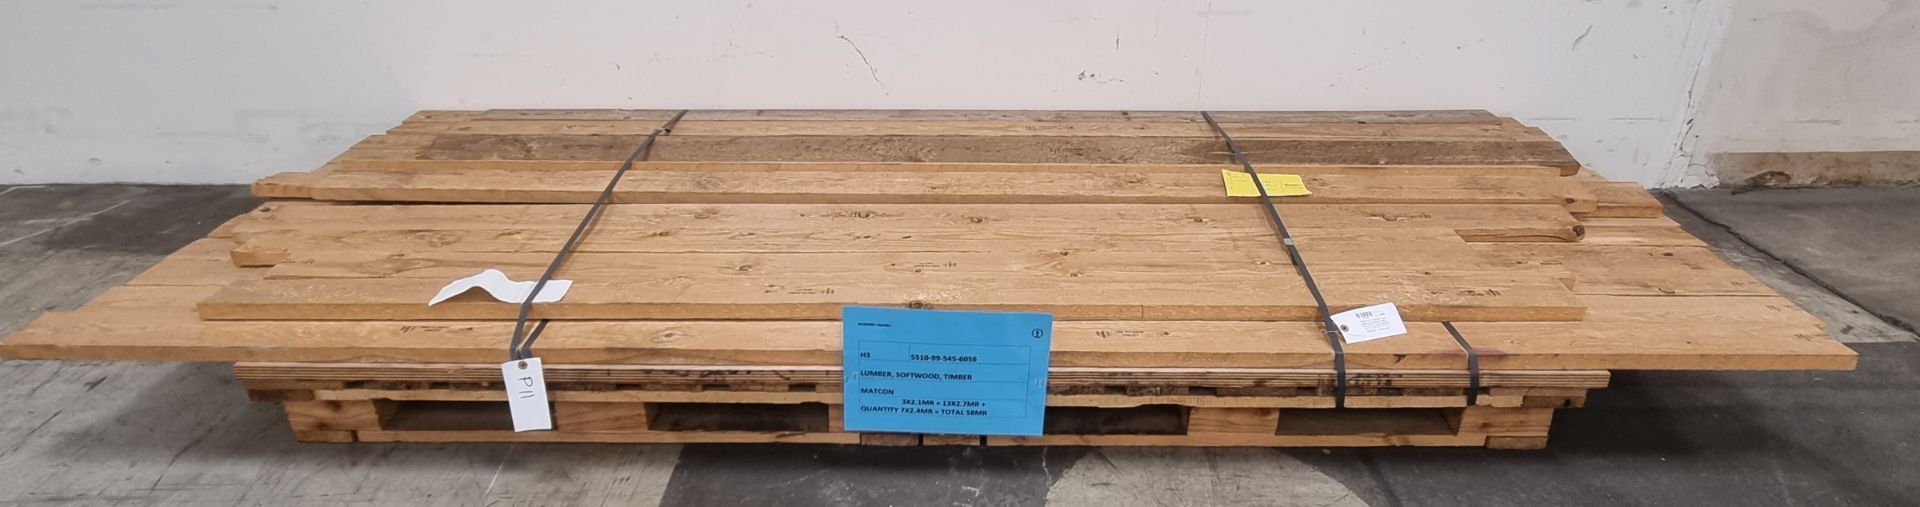 Pallet of 4"x1" softwood various lengths & Pallet of 4"x1" softwood 44pcs - Image 6 of 9